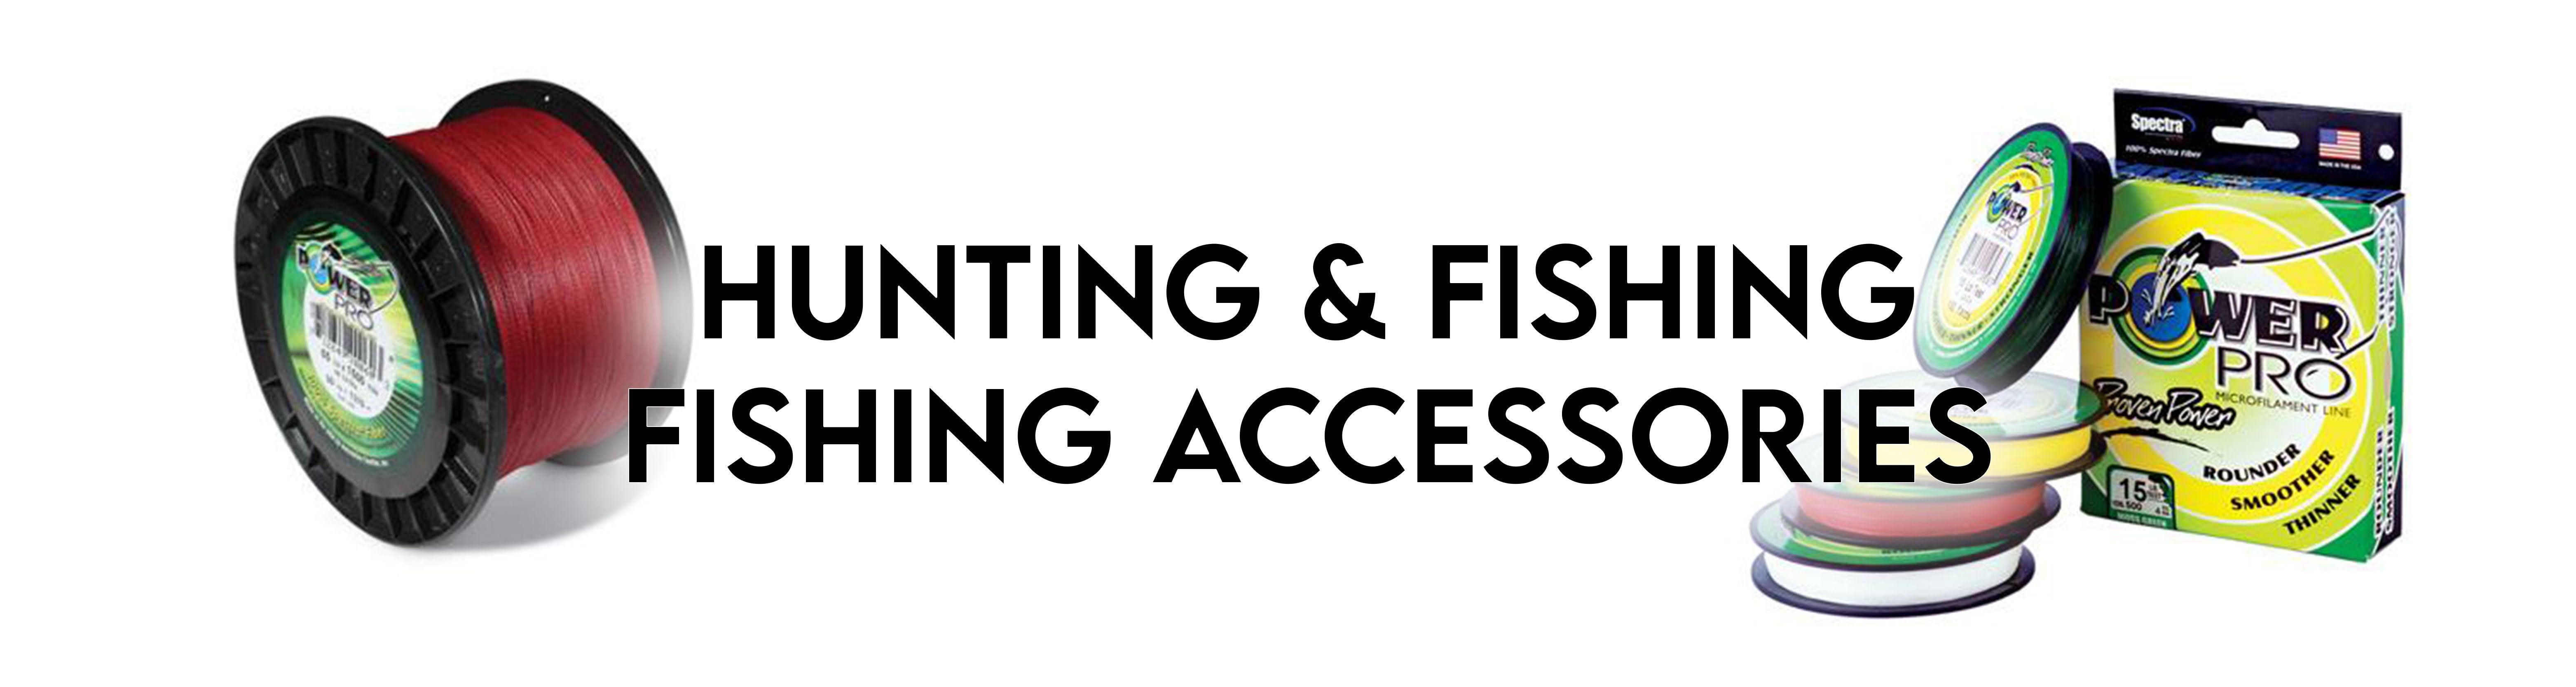 Hunting & Fishing - Fishing Accessories – Page 10 – Recreation